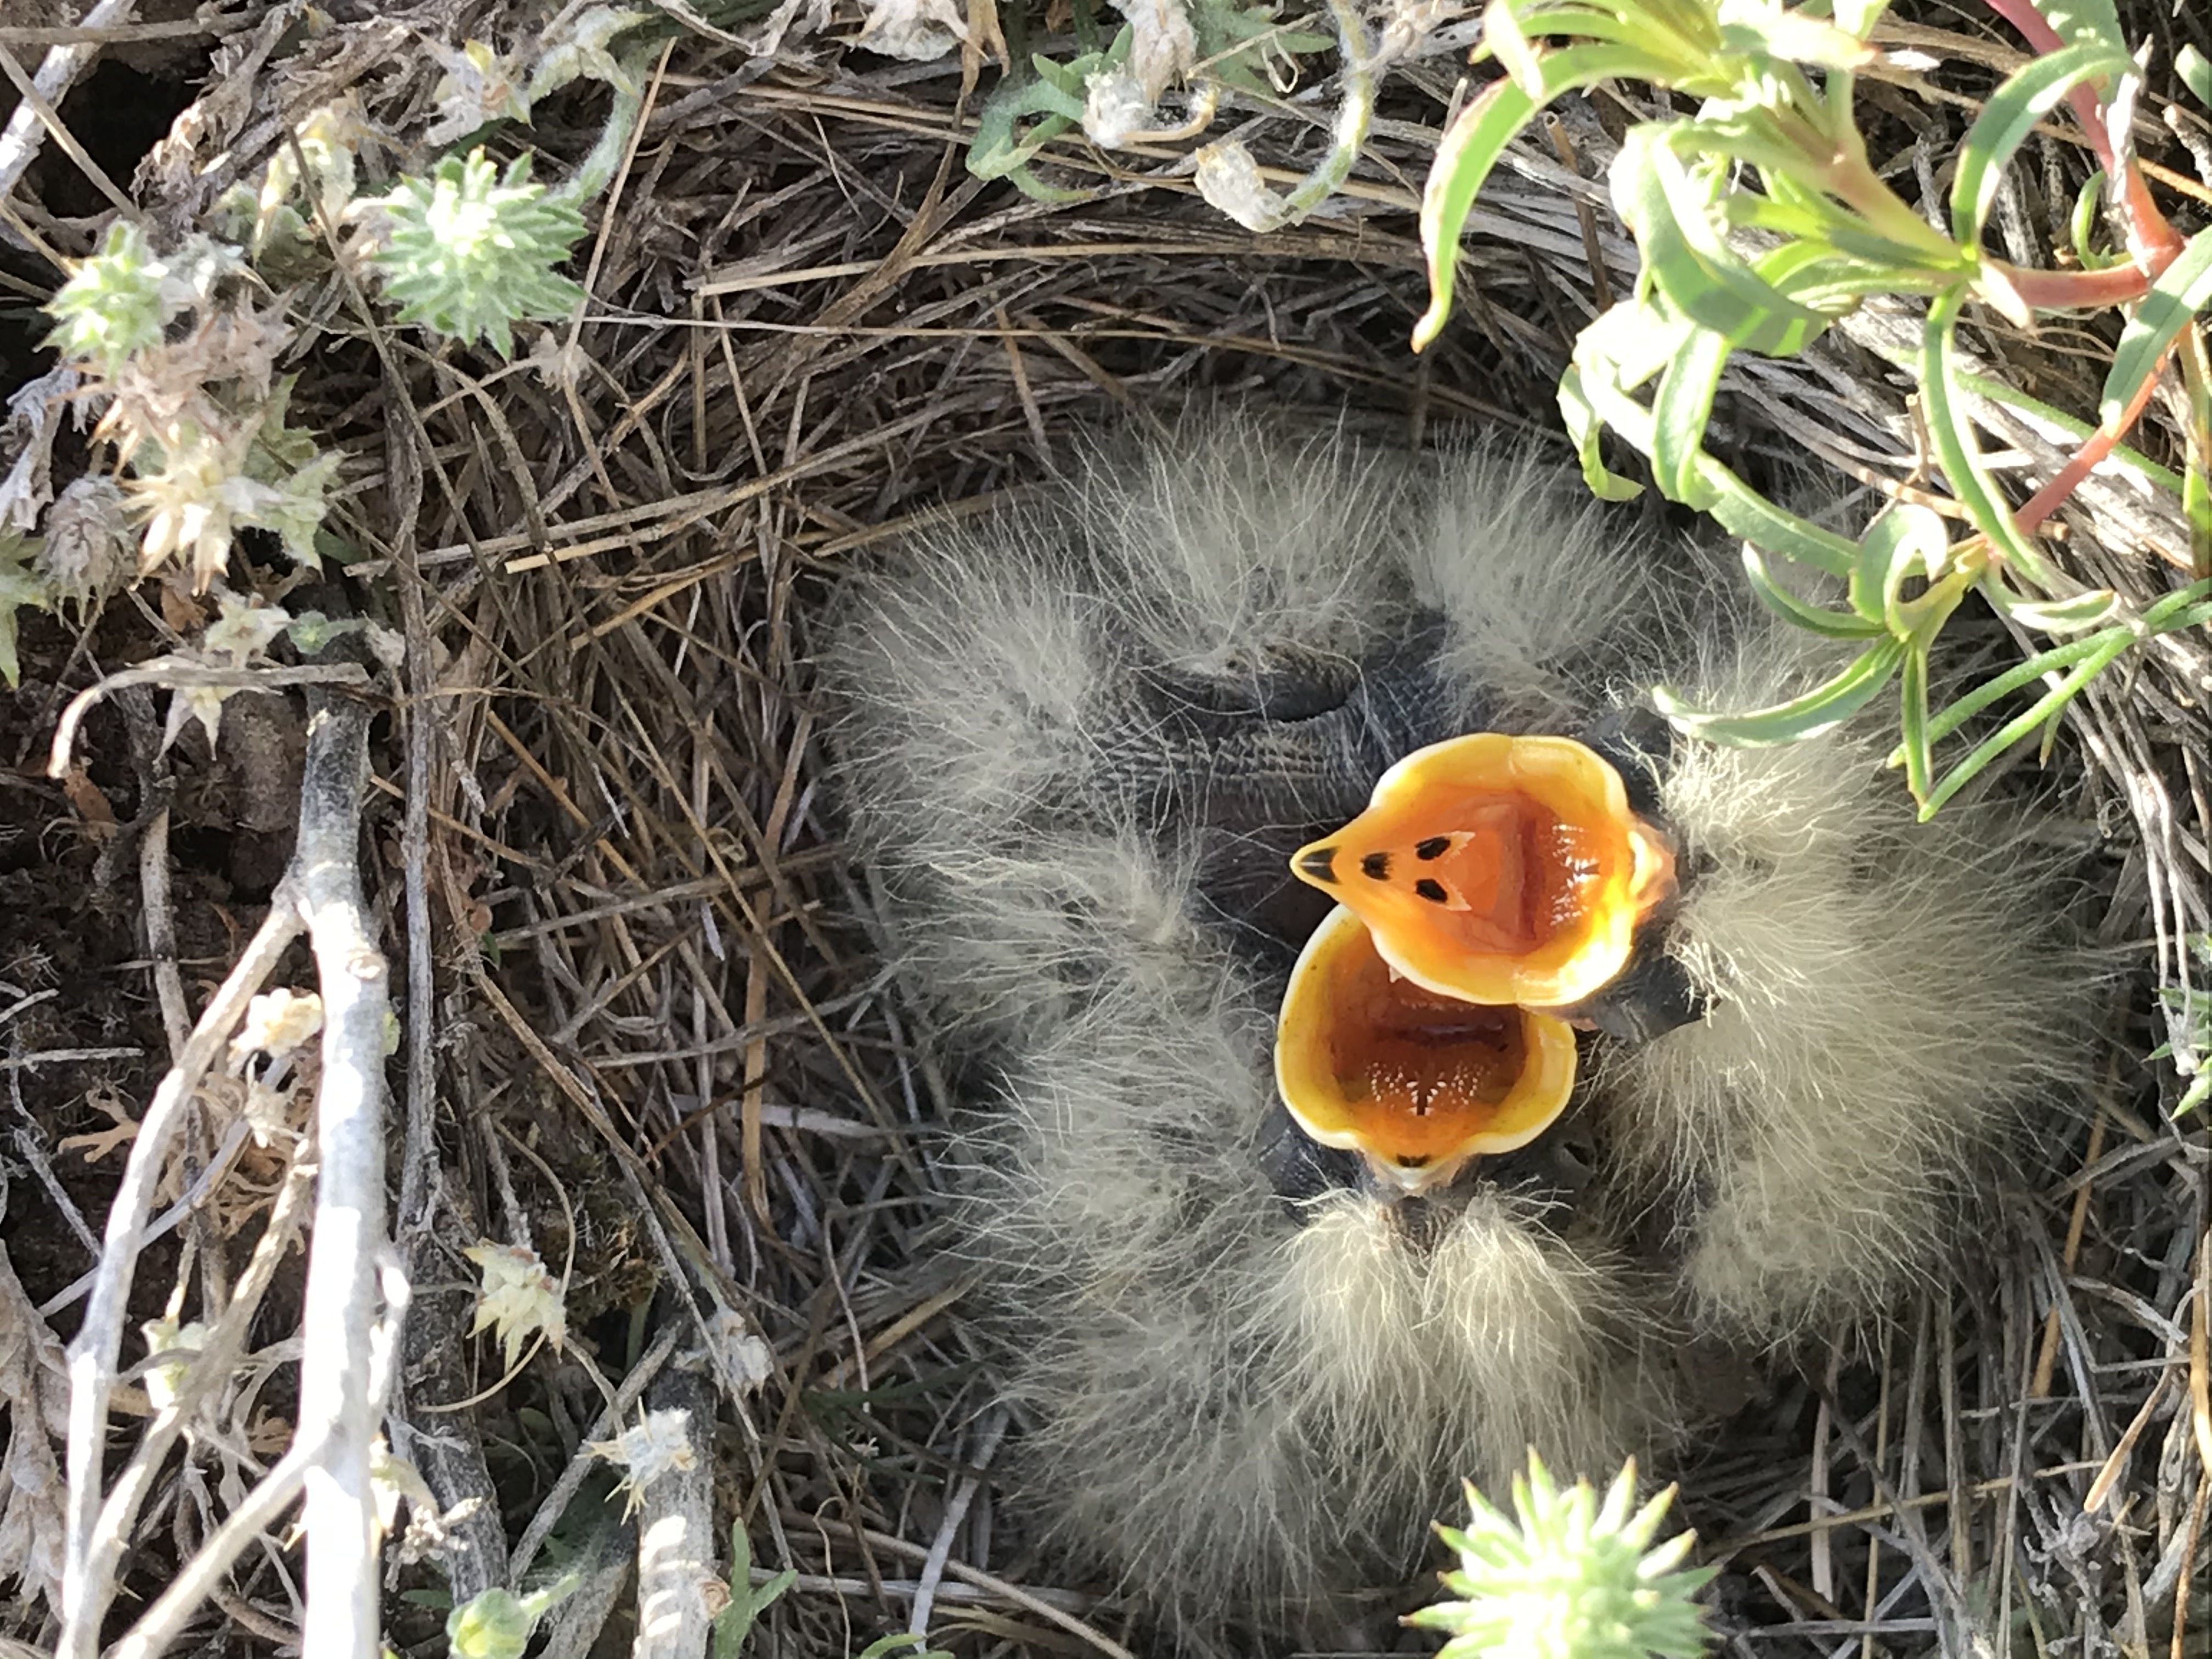 image shows yellow downy horned lark chicks facing the camera with mouths open